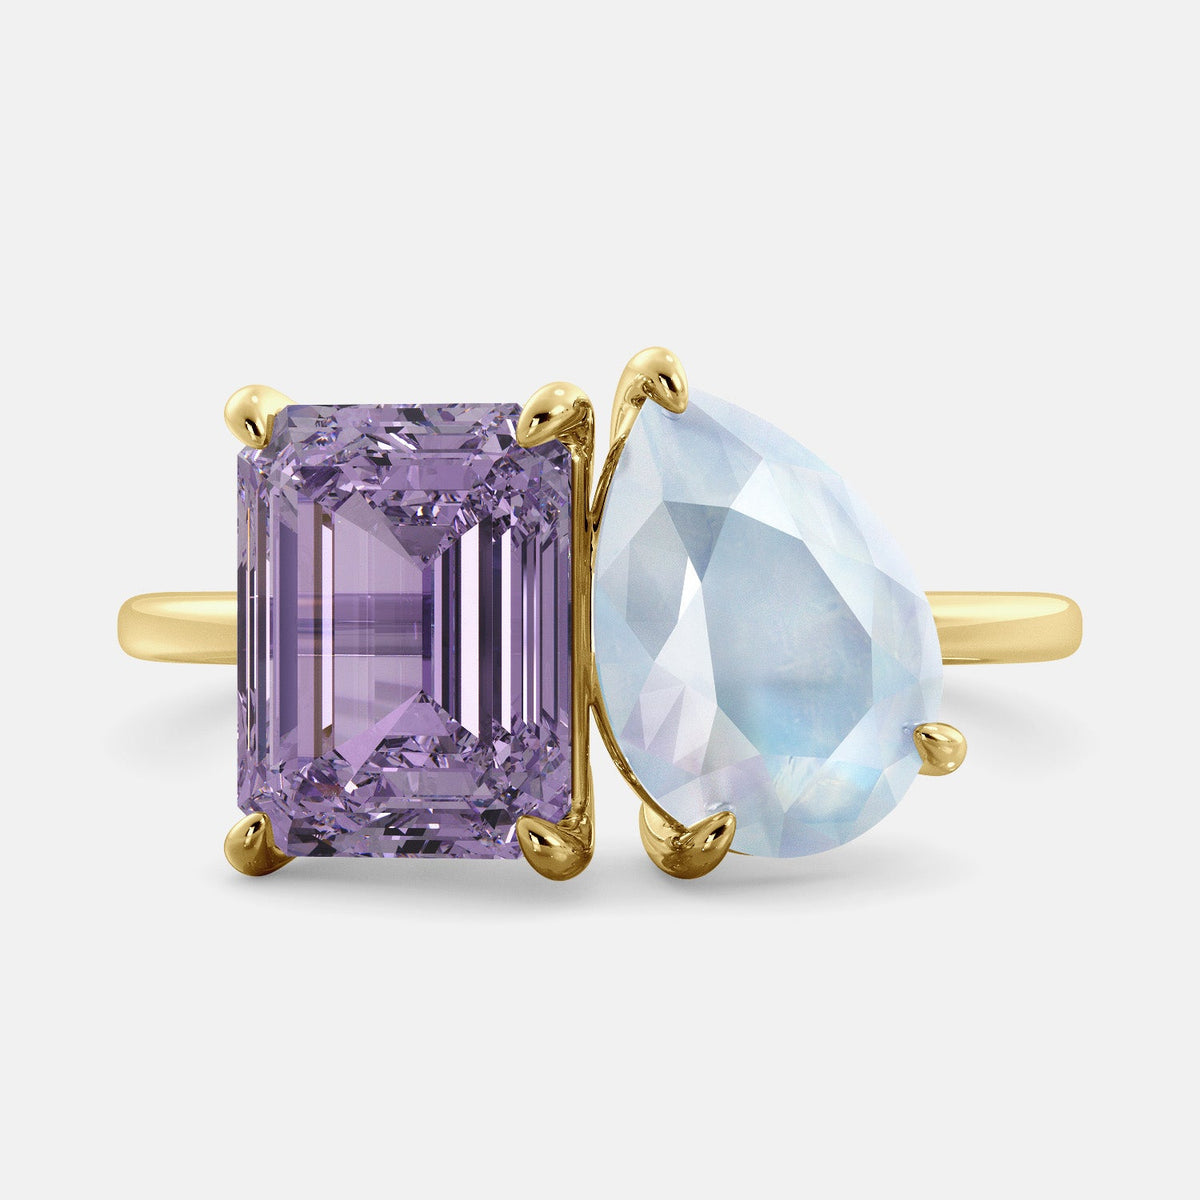 A toi et moi ring with an emerald-cut amethyst and a pear-cut gemstone. The emerald-cut morganite is set on the left of the ring, and the pear-cut gemstone is set on the right. The ring is made of recycled yellow gold and has a simple, elegant design. The pear-cut gemstone can be customized. **Here are some additional details about the image:** * The emerald-cut amethyst is a birthstone for February. * The pear-cut gemstone can be customized to any stone of your choice.